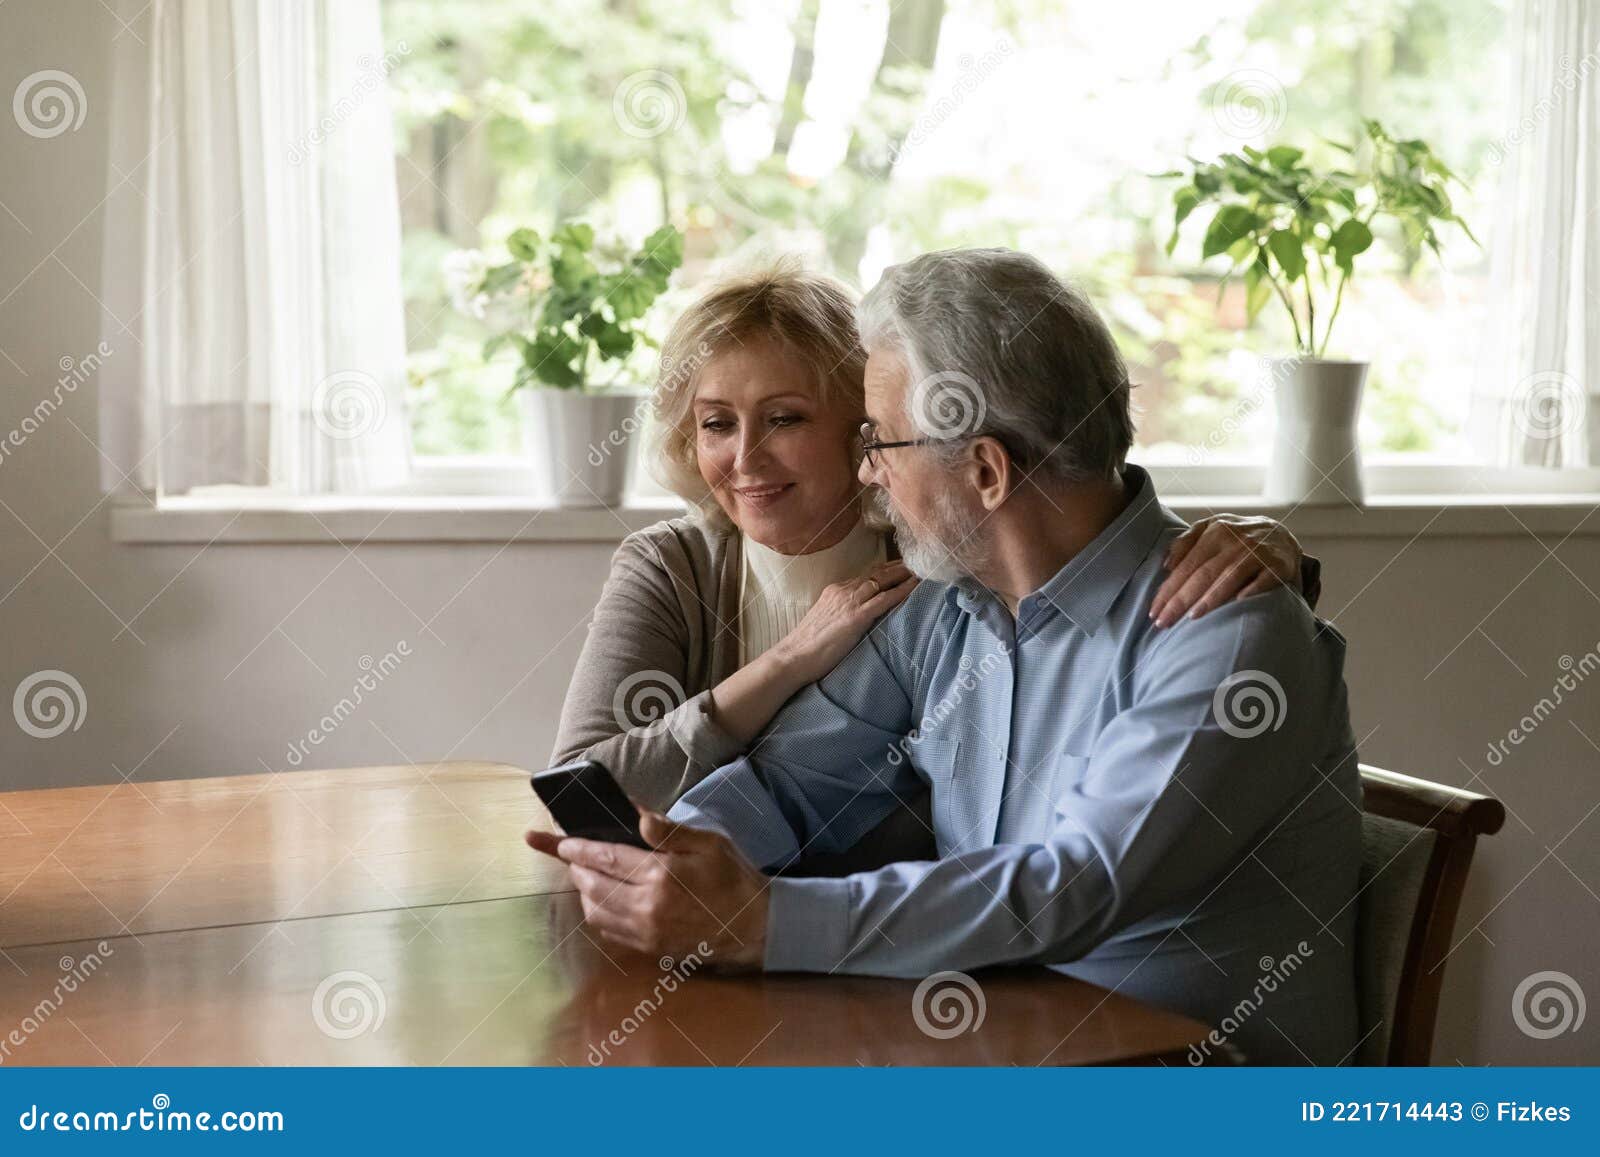 happy mature couple use smartphone gadget at home